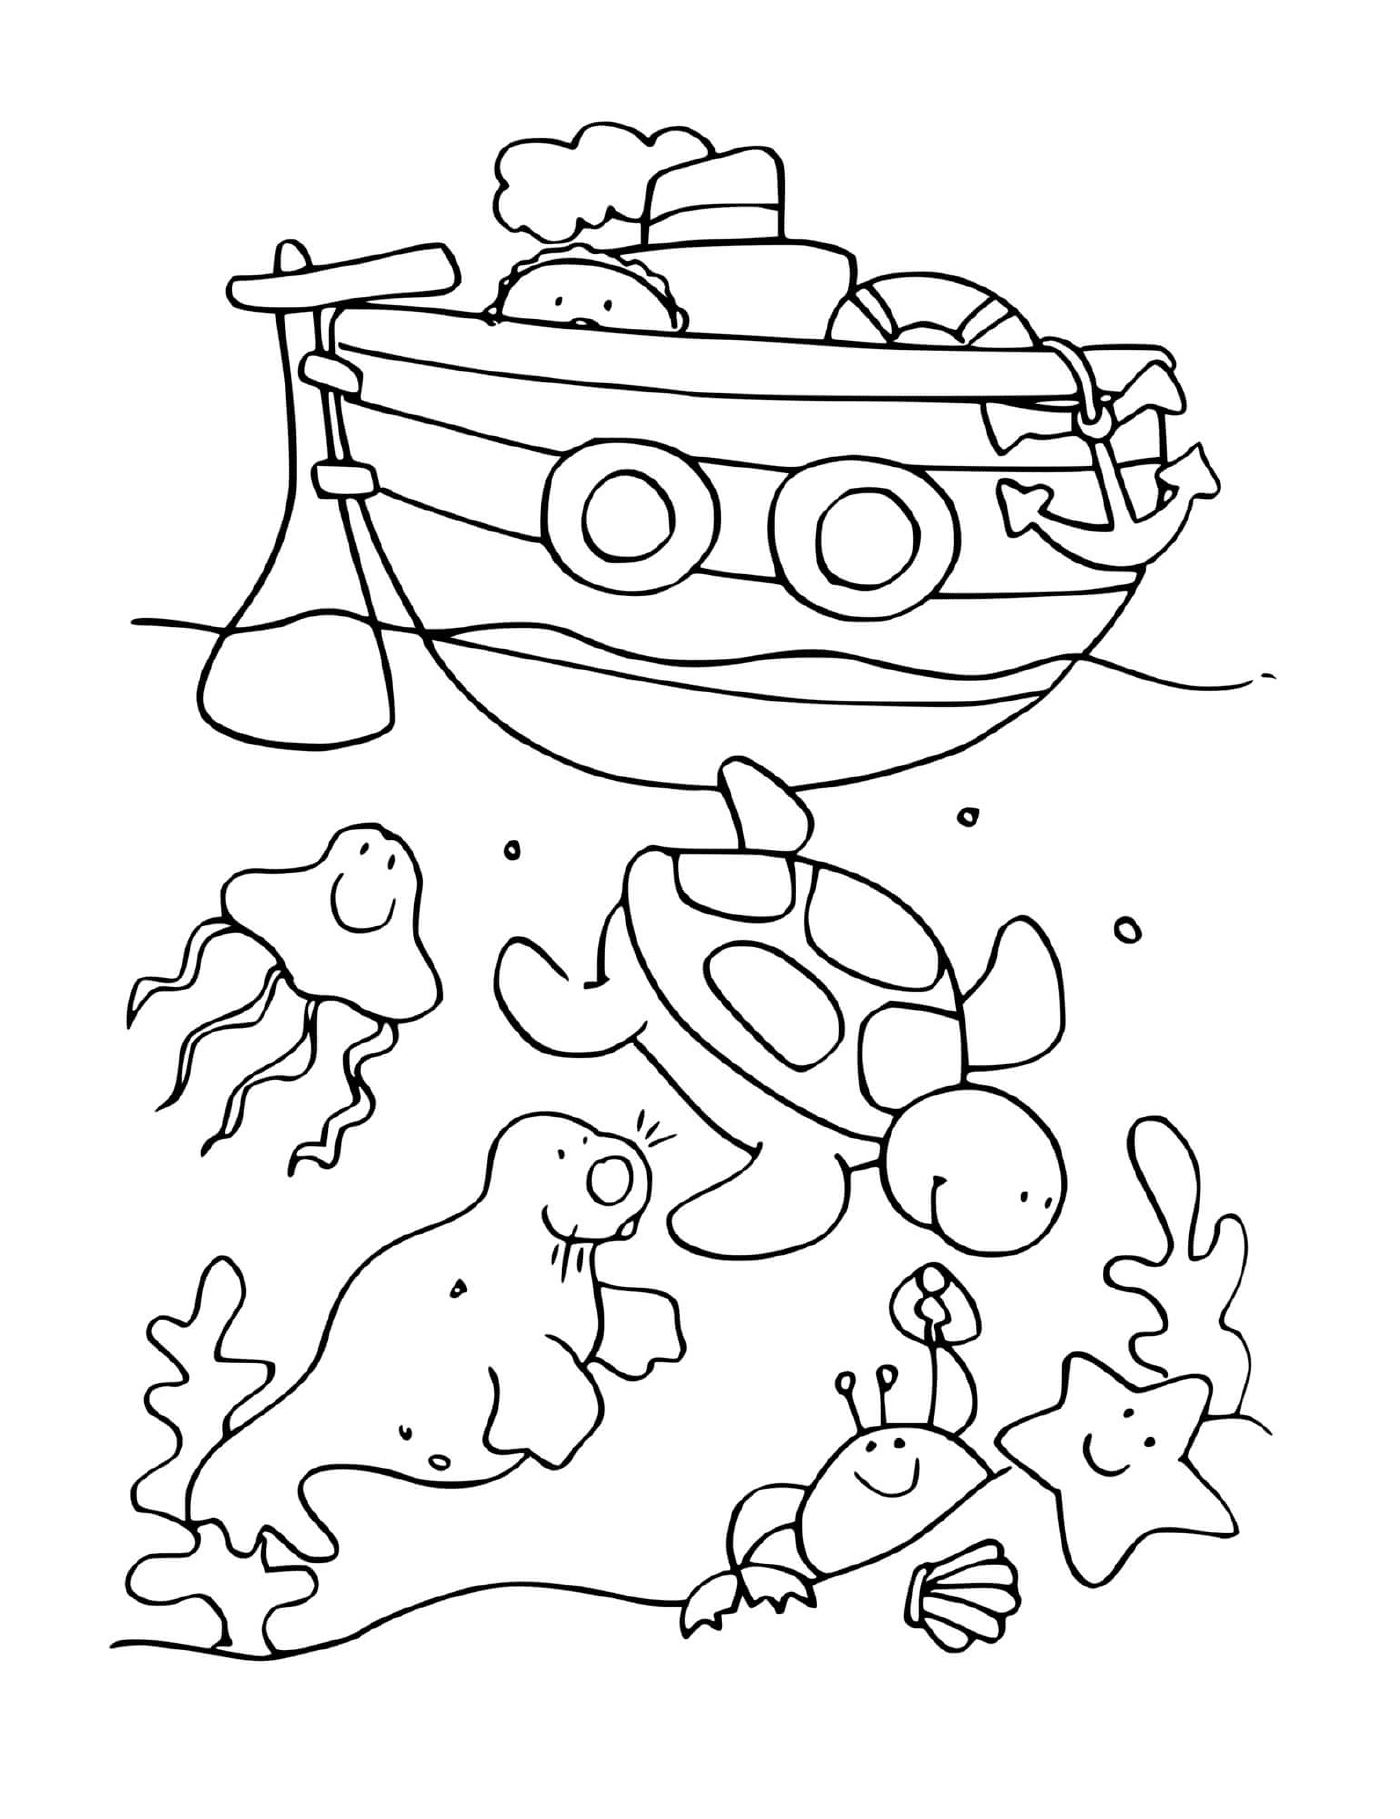  Boat and marine animals in a seabed 